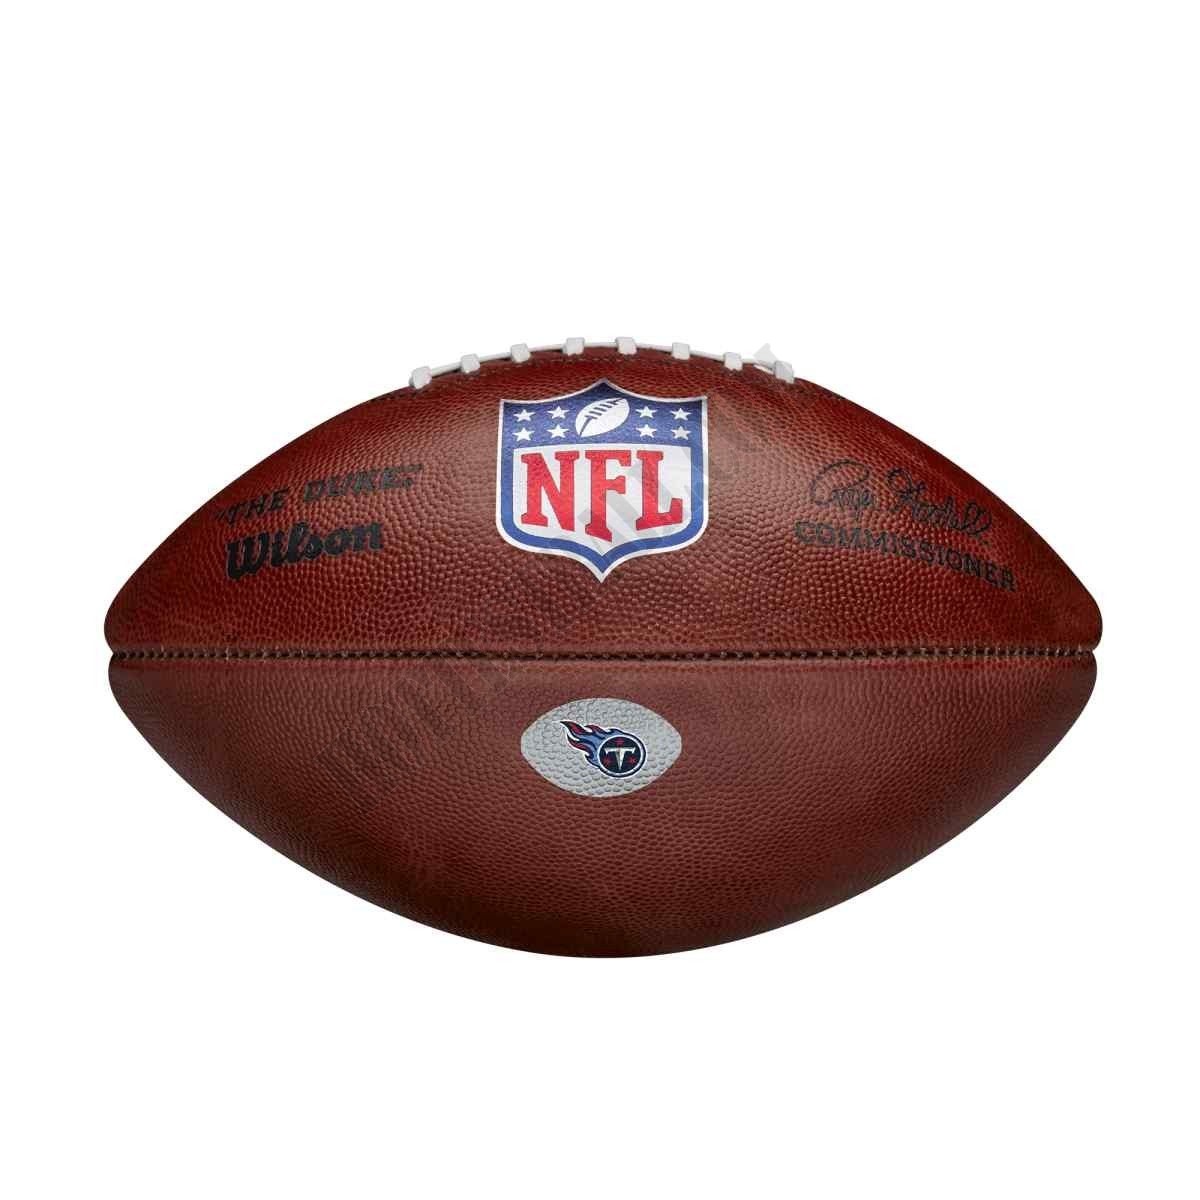 The Duke Decal NFL Football - Tennessee Titans ● Wilson Promotions - The Duke Decal NFL Football - Tennessee Titans ● Wilson Promotions